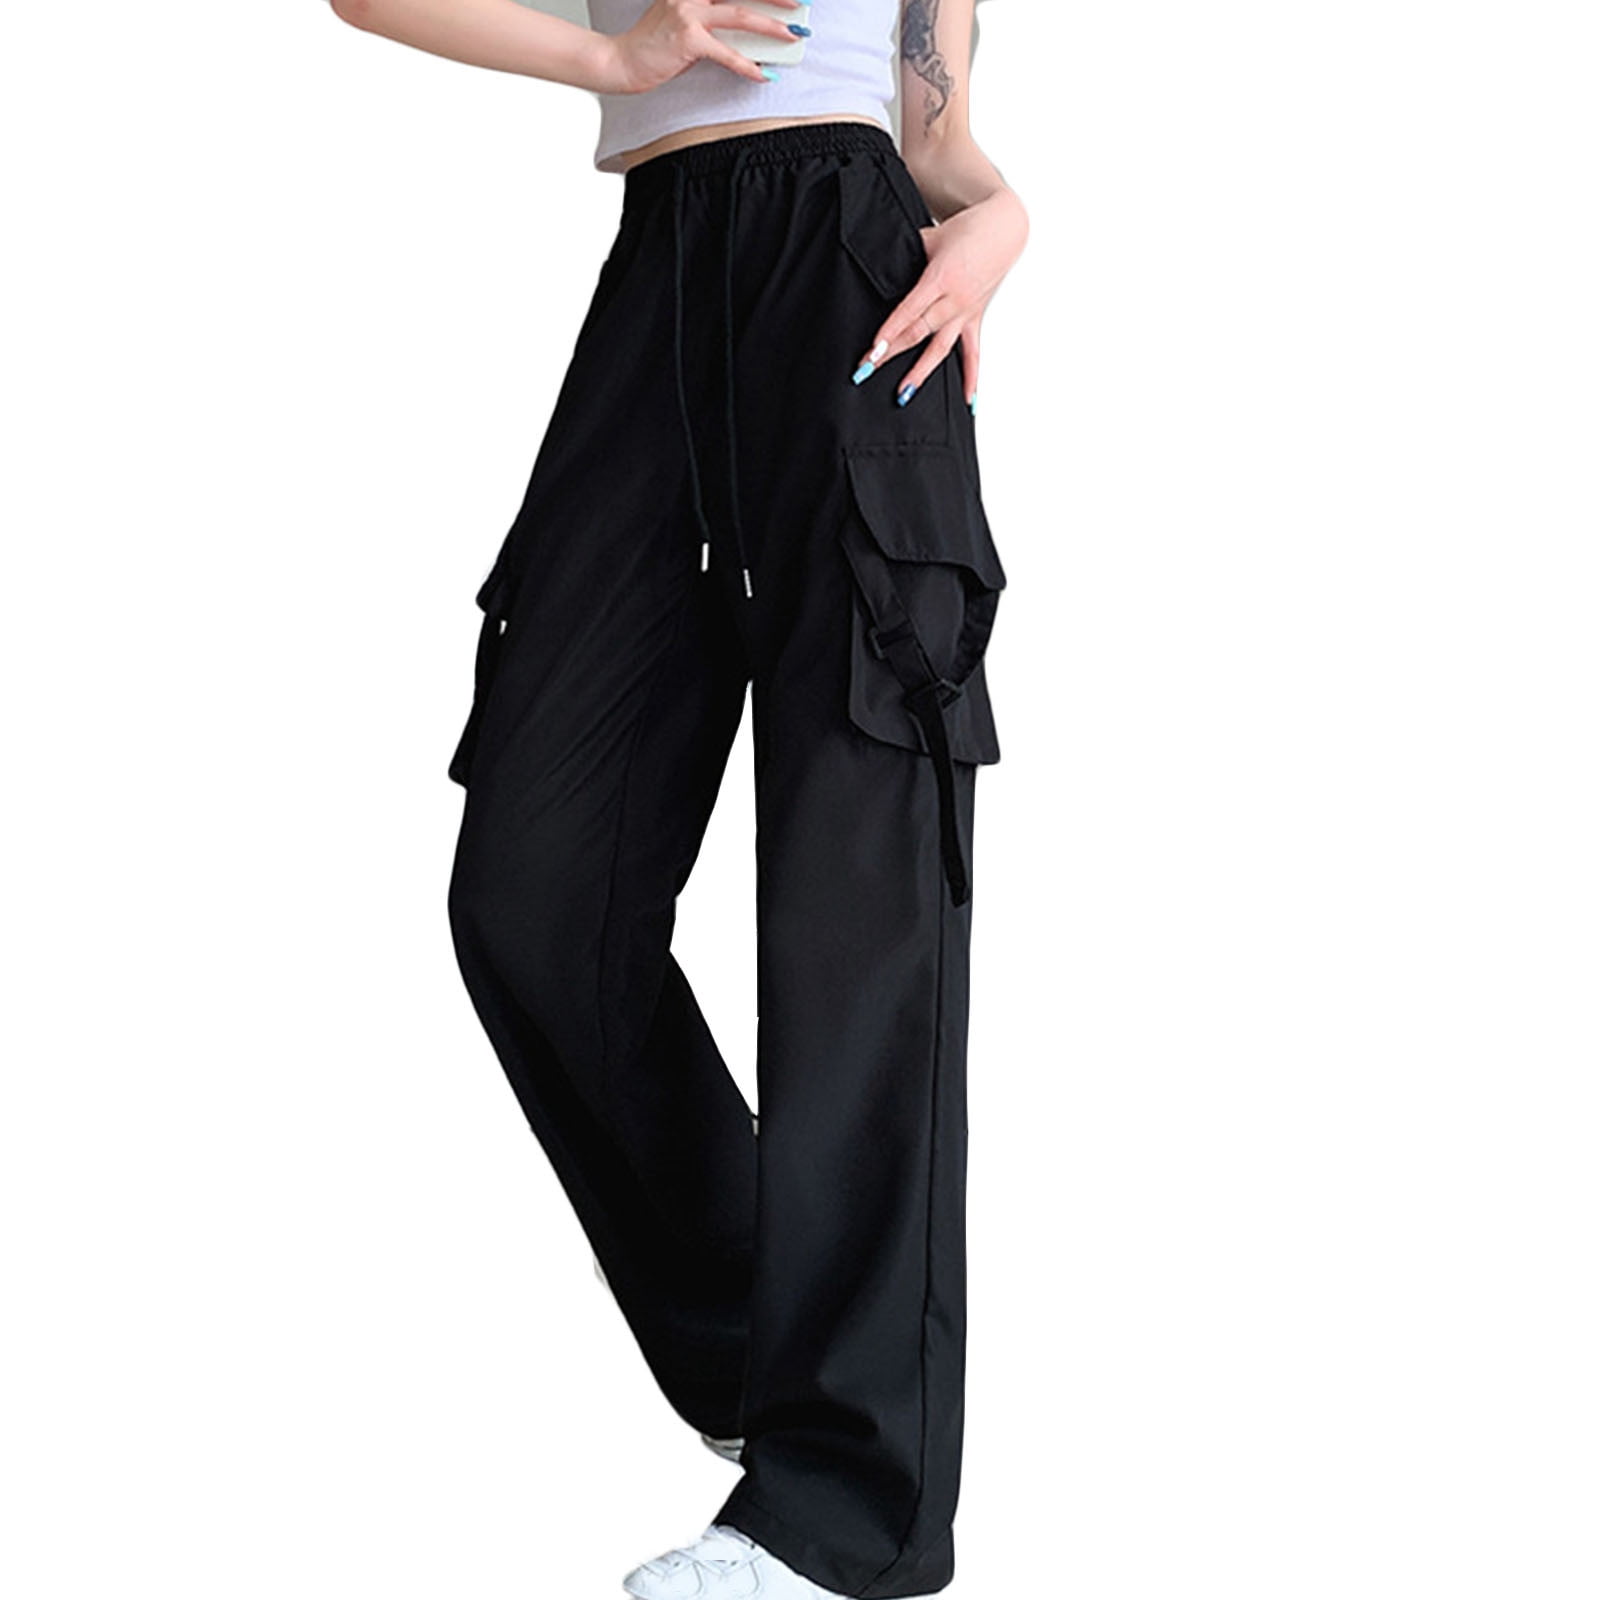 SMihono Deals Young Womens Plus Size Full Length Cargo Pants Women's  Spring/Summer Color Casual Workwear Pocket Pants Black 4 